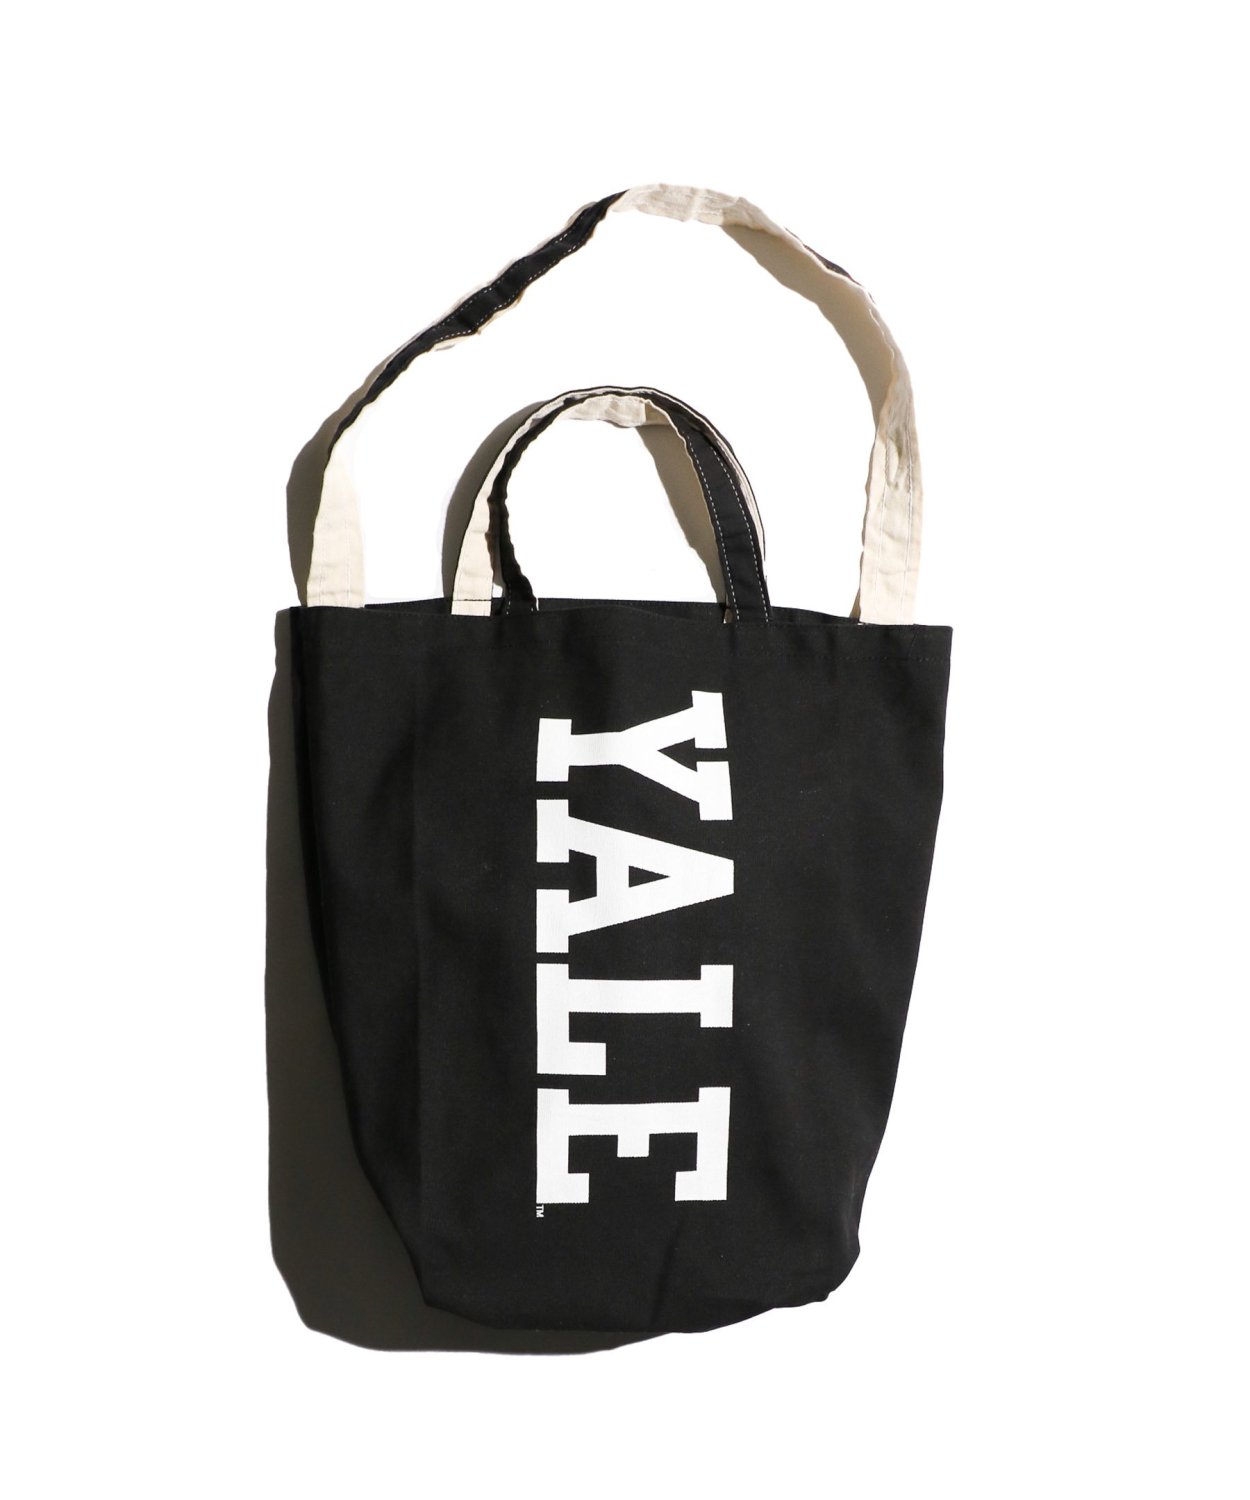 The BOOK STORE / YALE MARKET TOTE